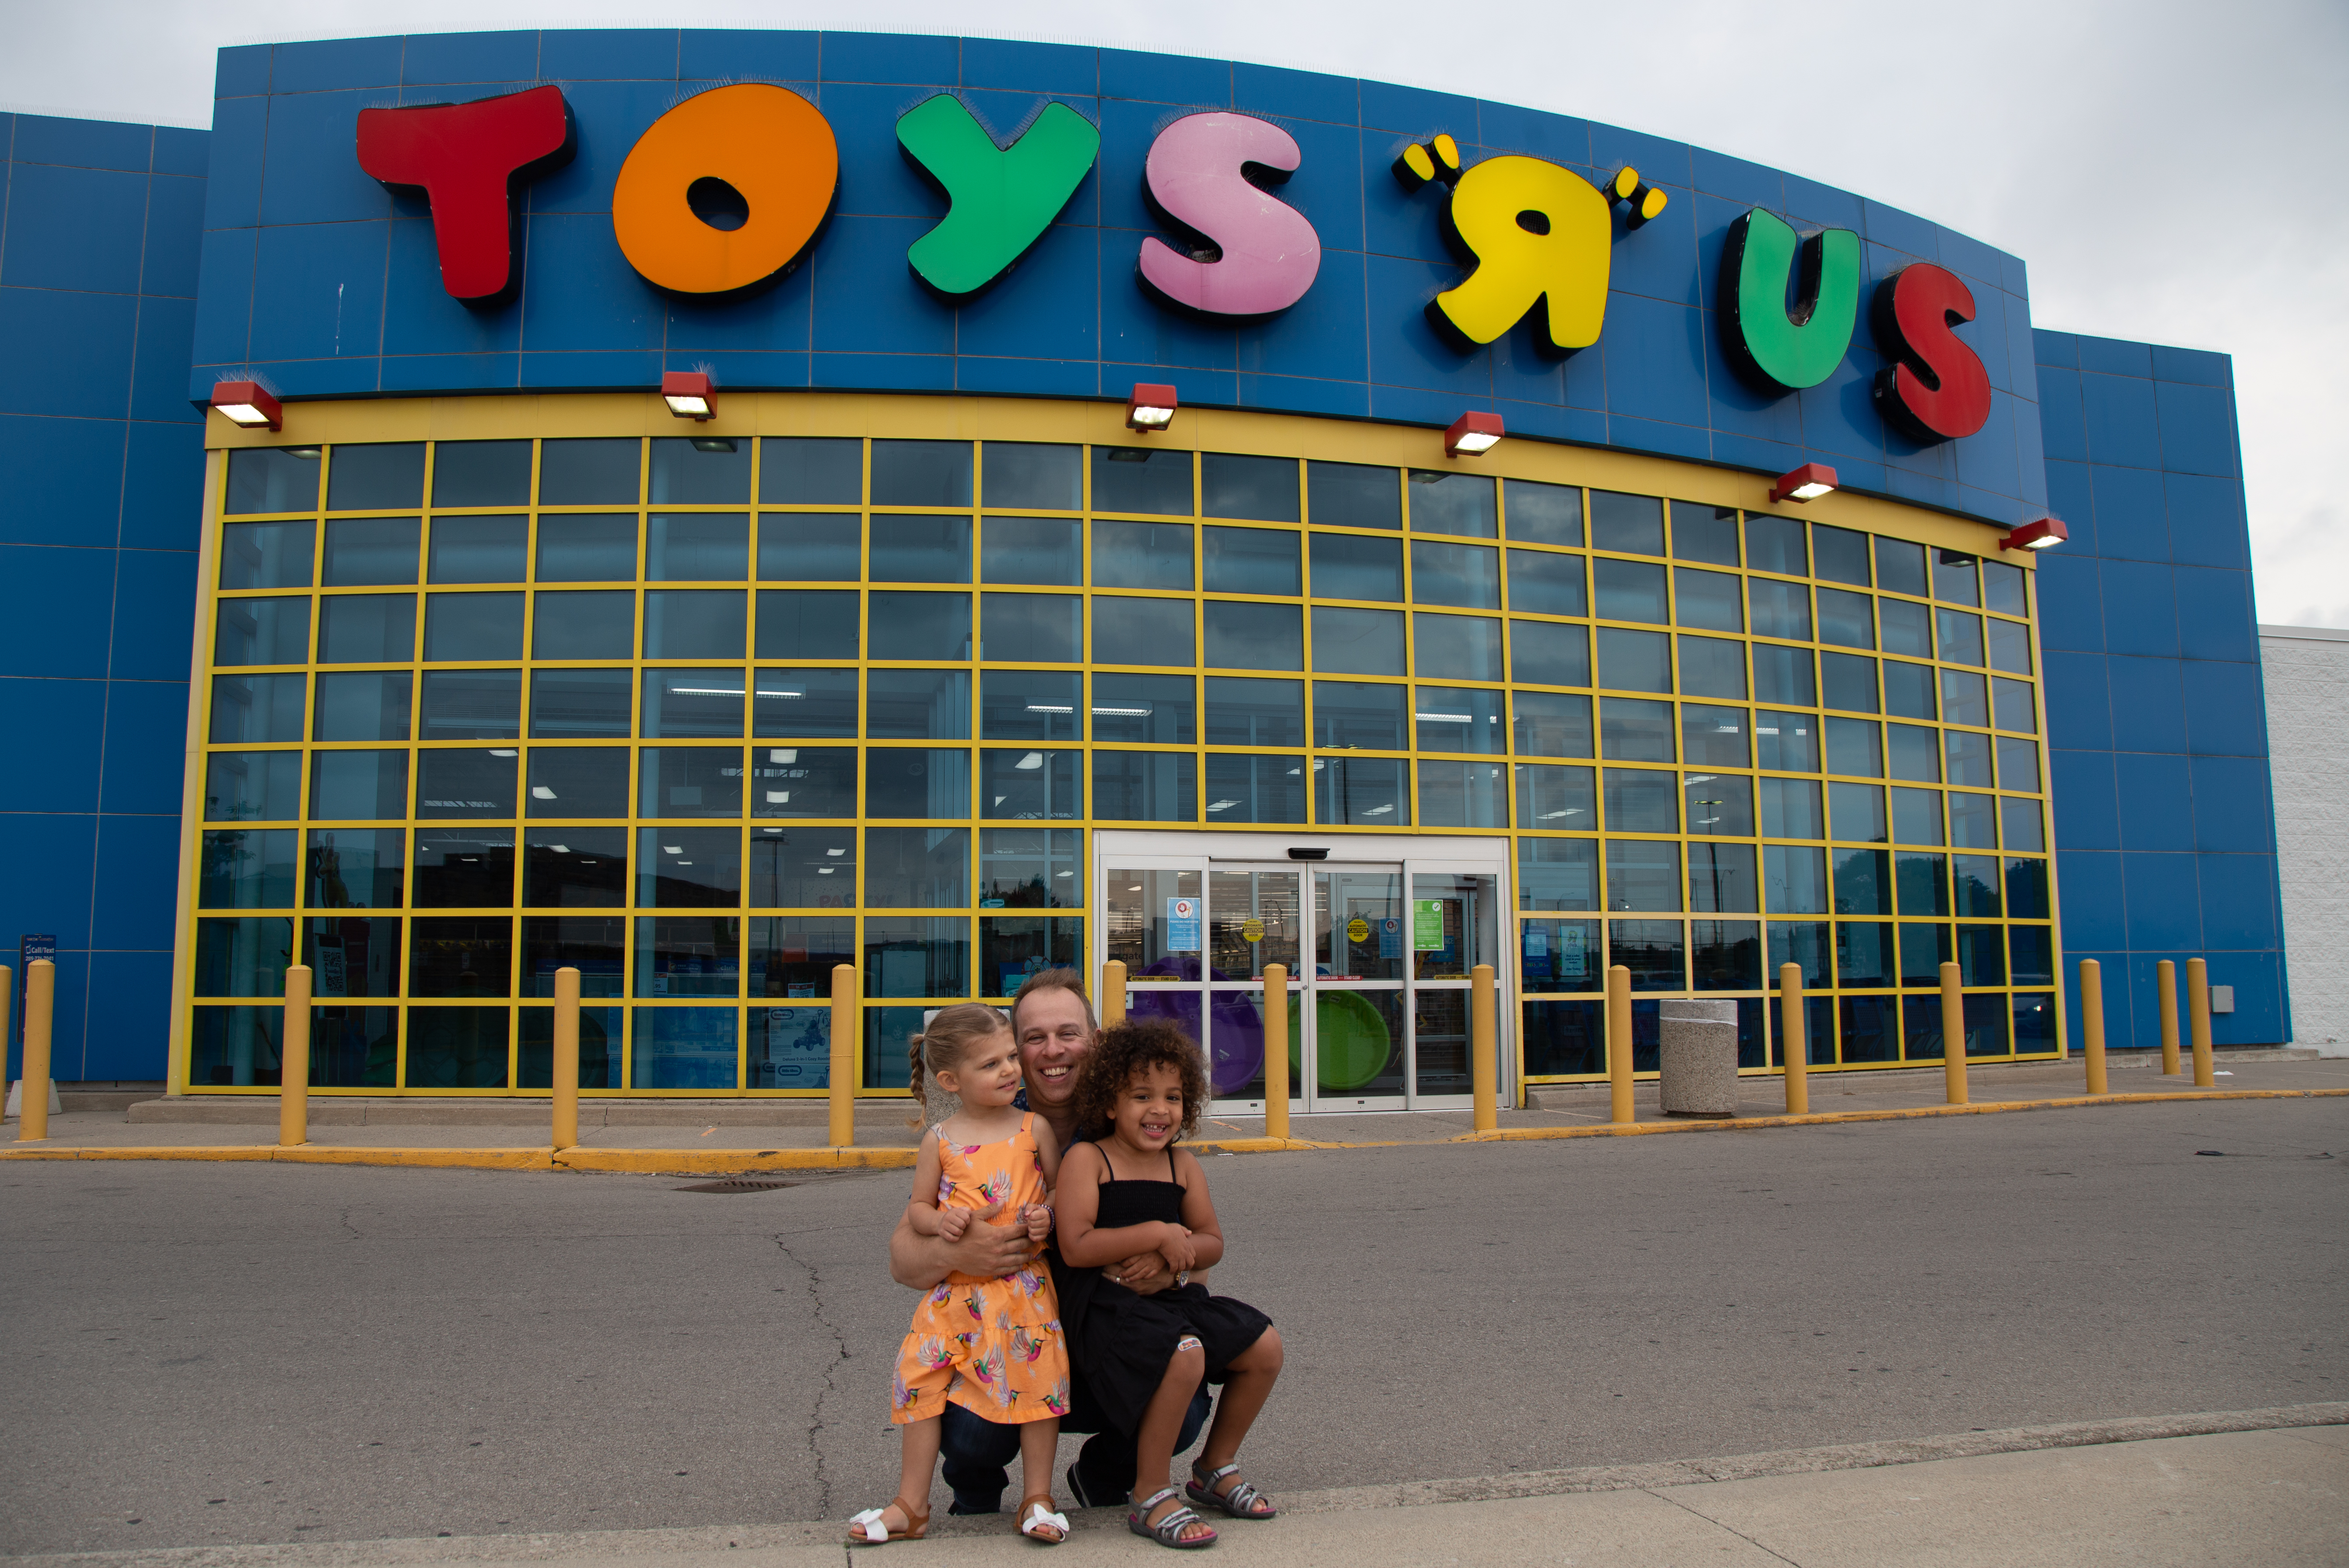 Putman Investments to Purchase Toys'R'Us and Babies'R'Us Canada